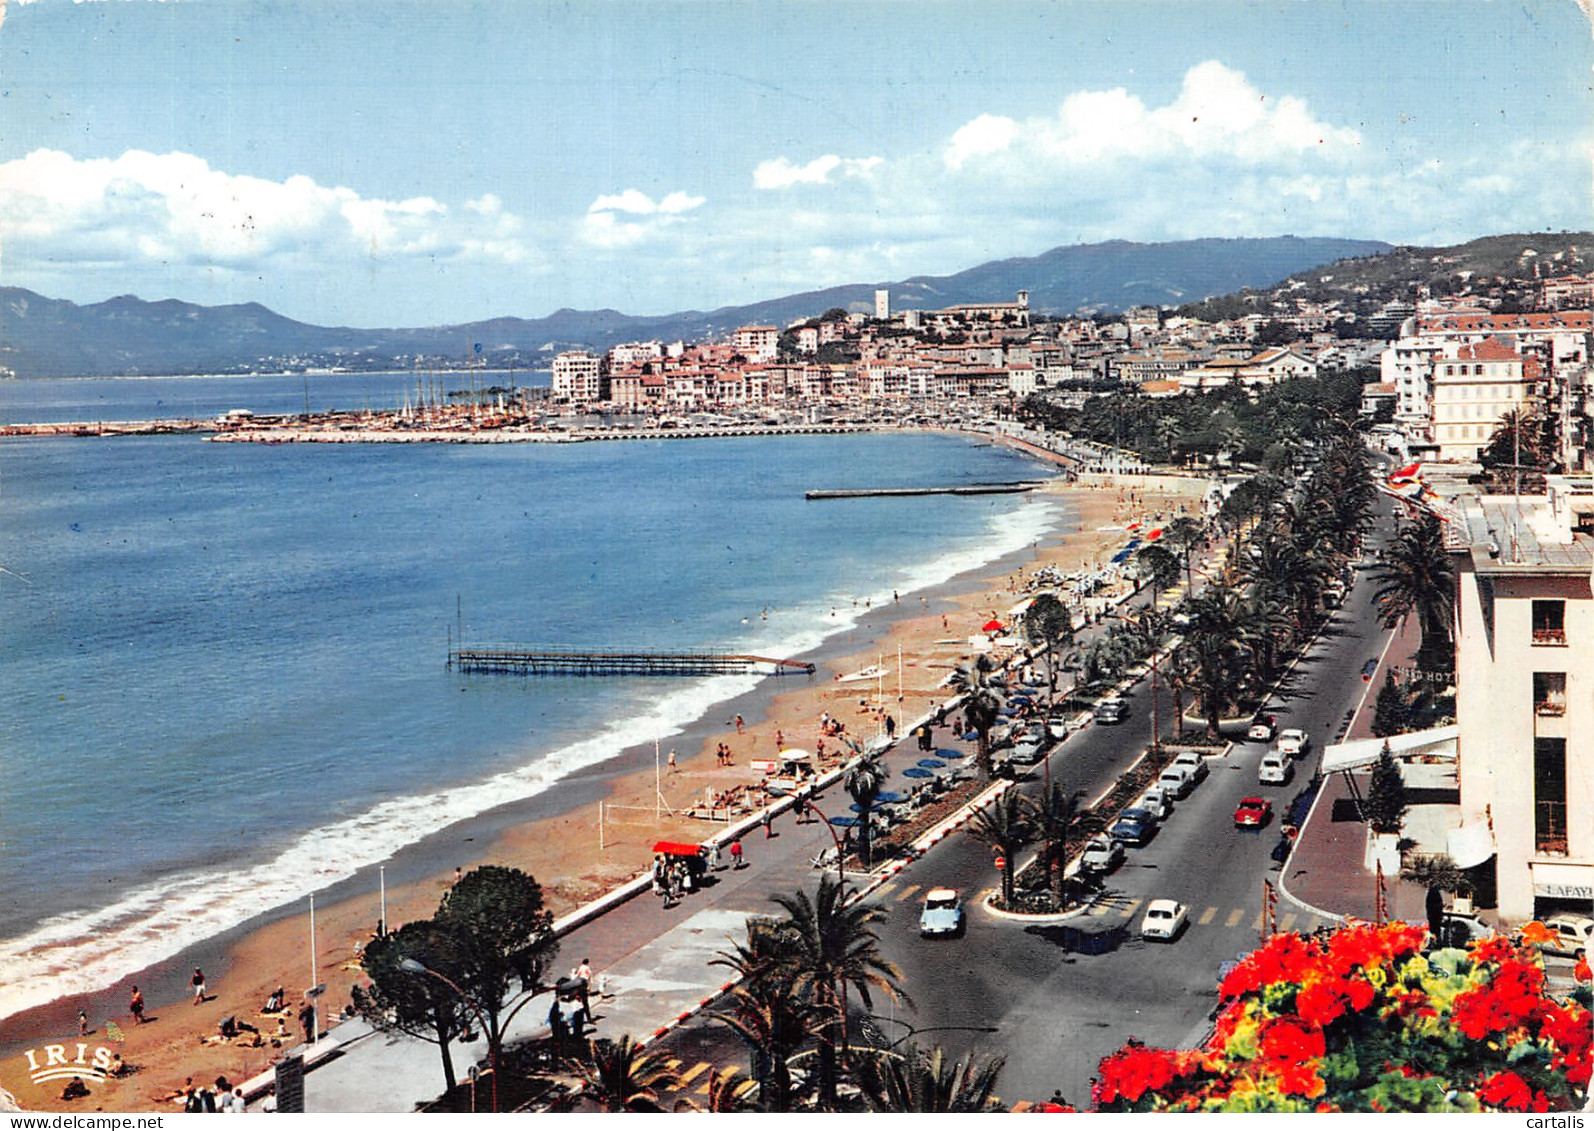 06-CANNES-N°4182-D/0115 - Cannes